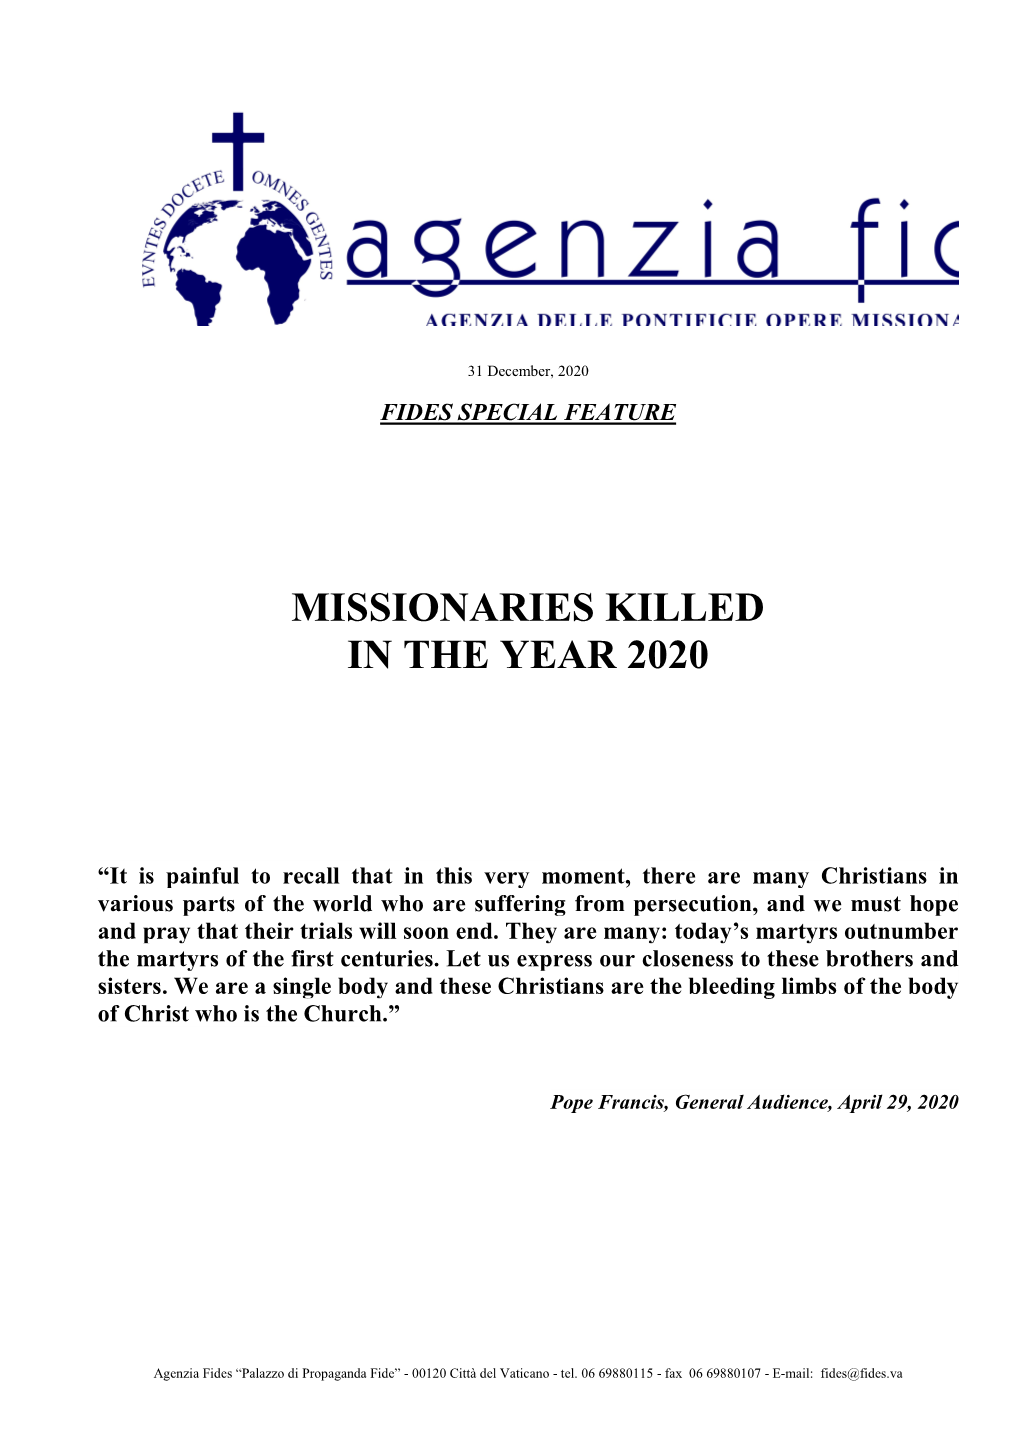 Missionaries Killed in the Year 2020